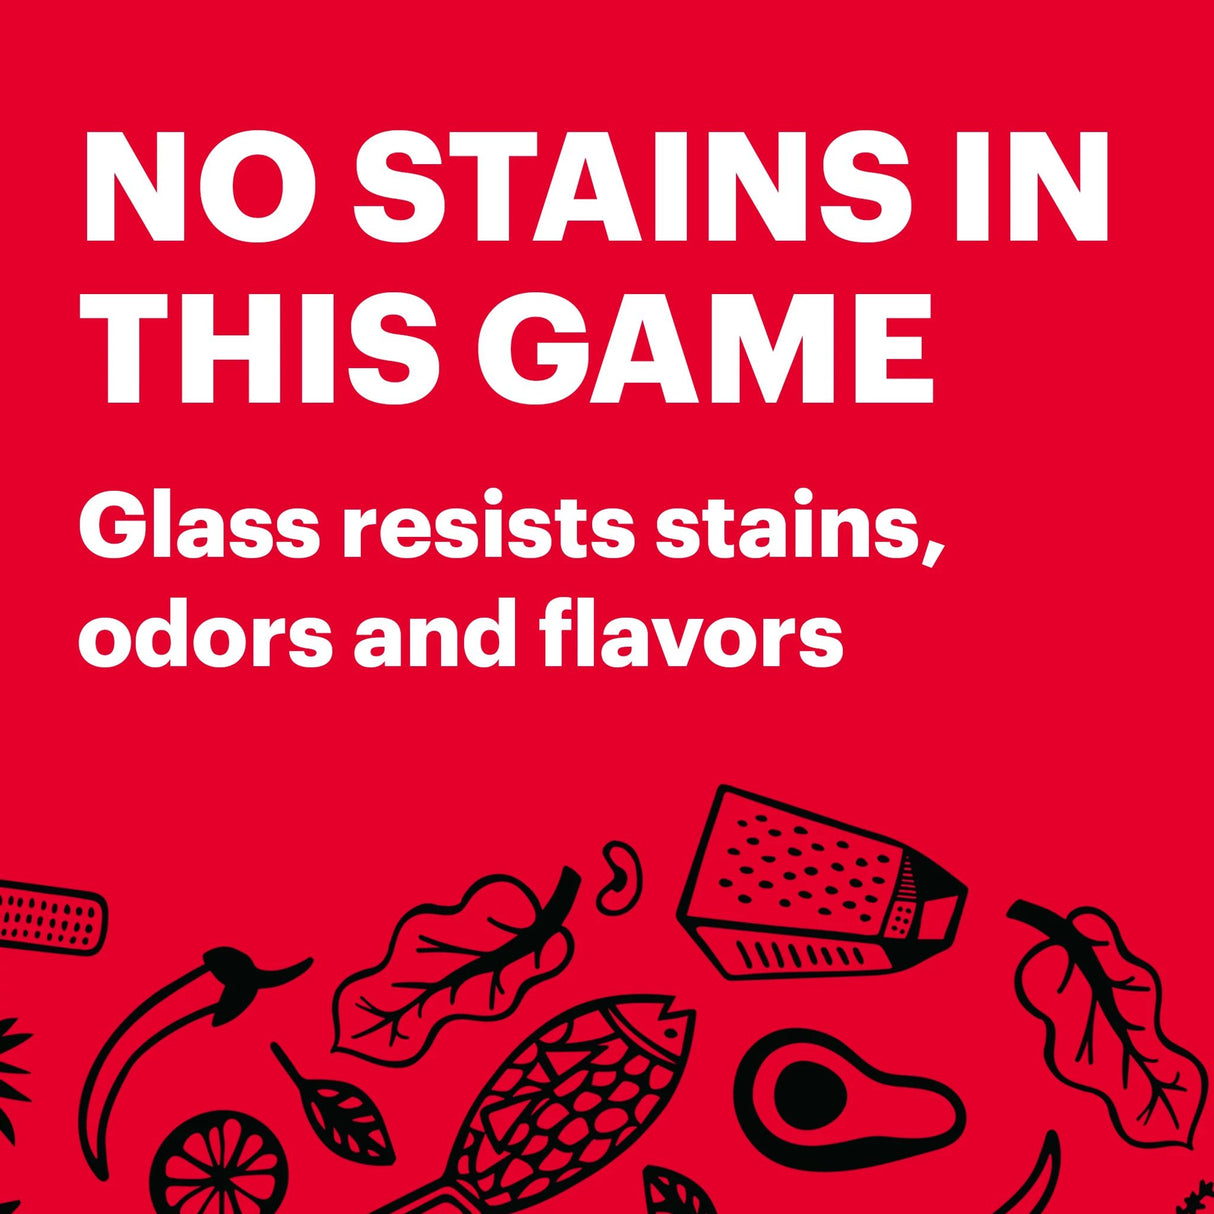  text that says glass resists stains, odors and flavors